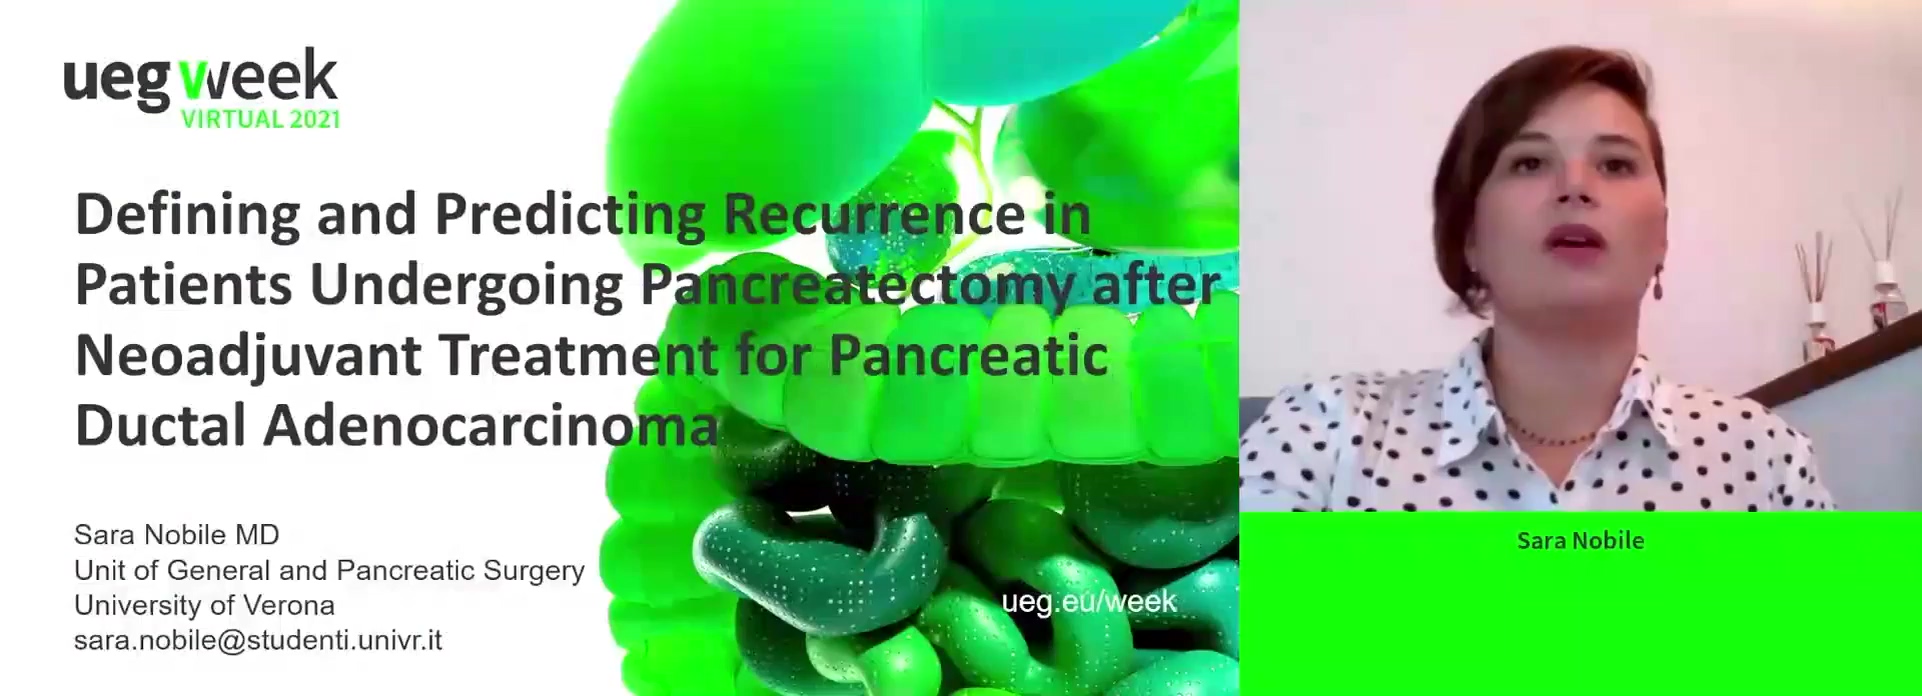 DEFINING AND PREDICTING RECURRENCE IN PATIENTS UNDERGOING PANCREATECTOMY AFTER NEOADJUVANT TREATMENT FOR PANCREATIC DUCTAL ADENOCARCINOMA